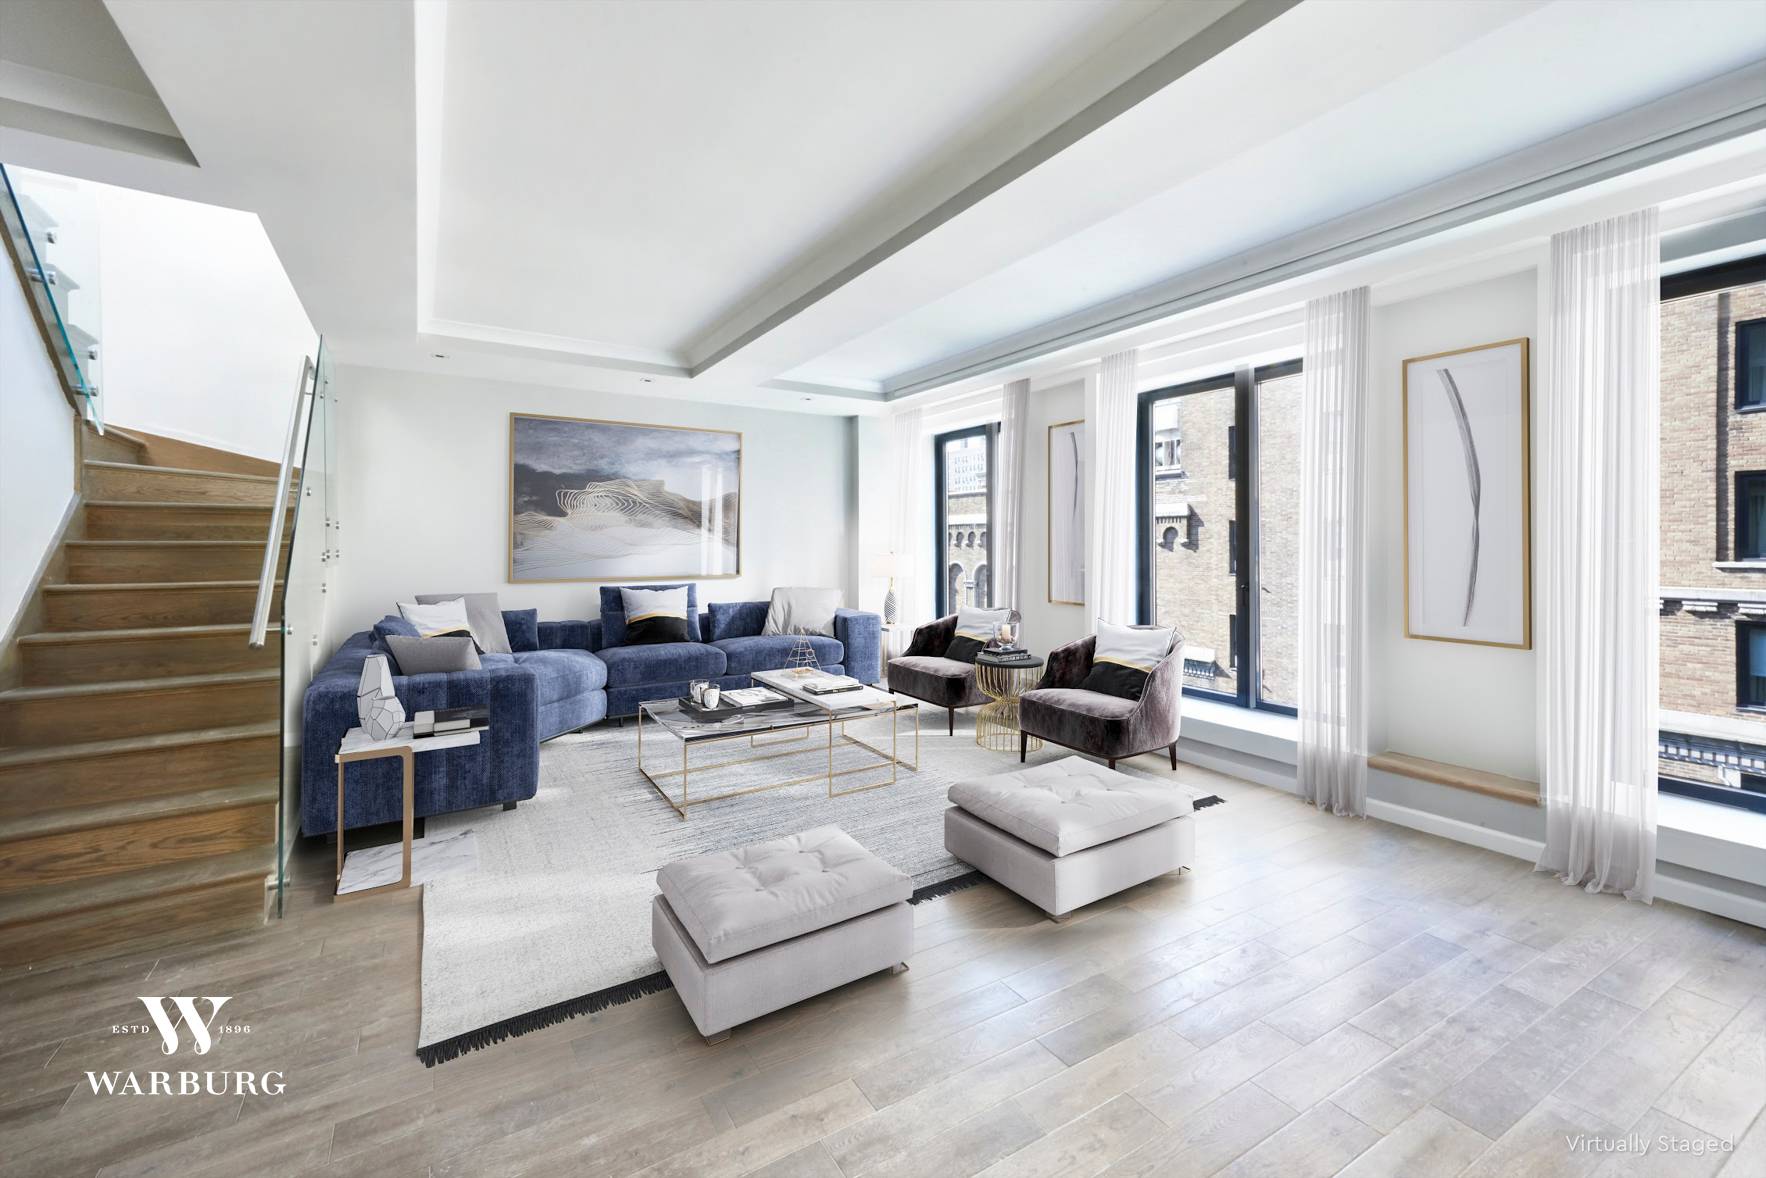 The 7th floor Penthouse at 207 West 75th Street, a brand new boutique development on the Upper West Side, is a 2, 373 square foot residence with two bedrooms and ...